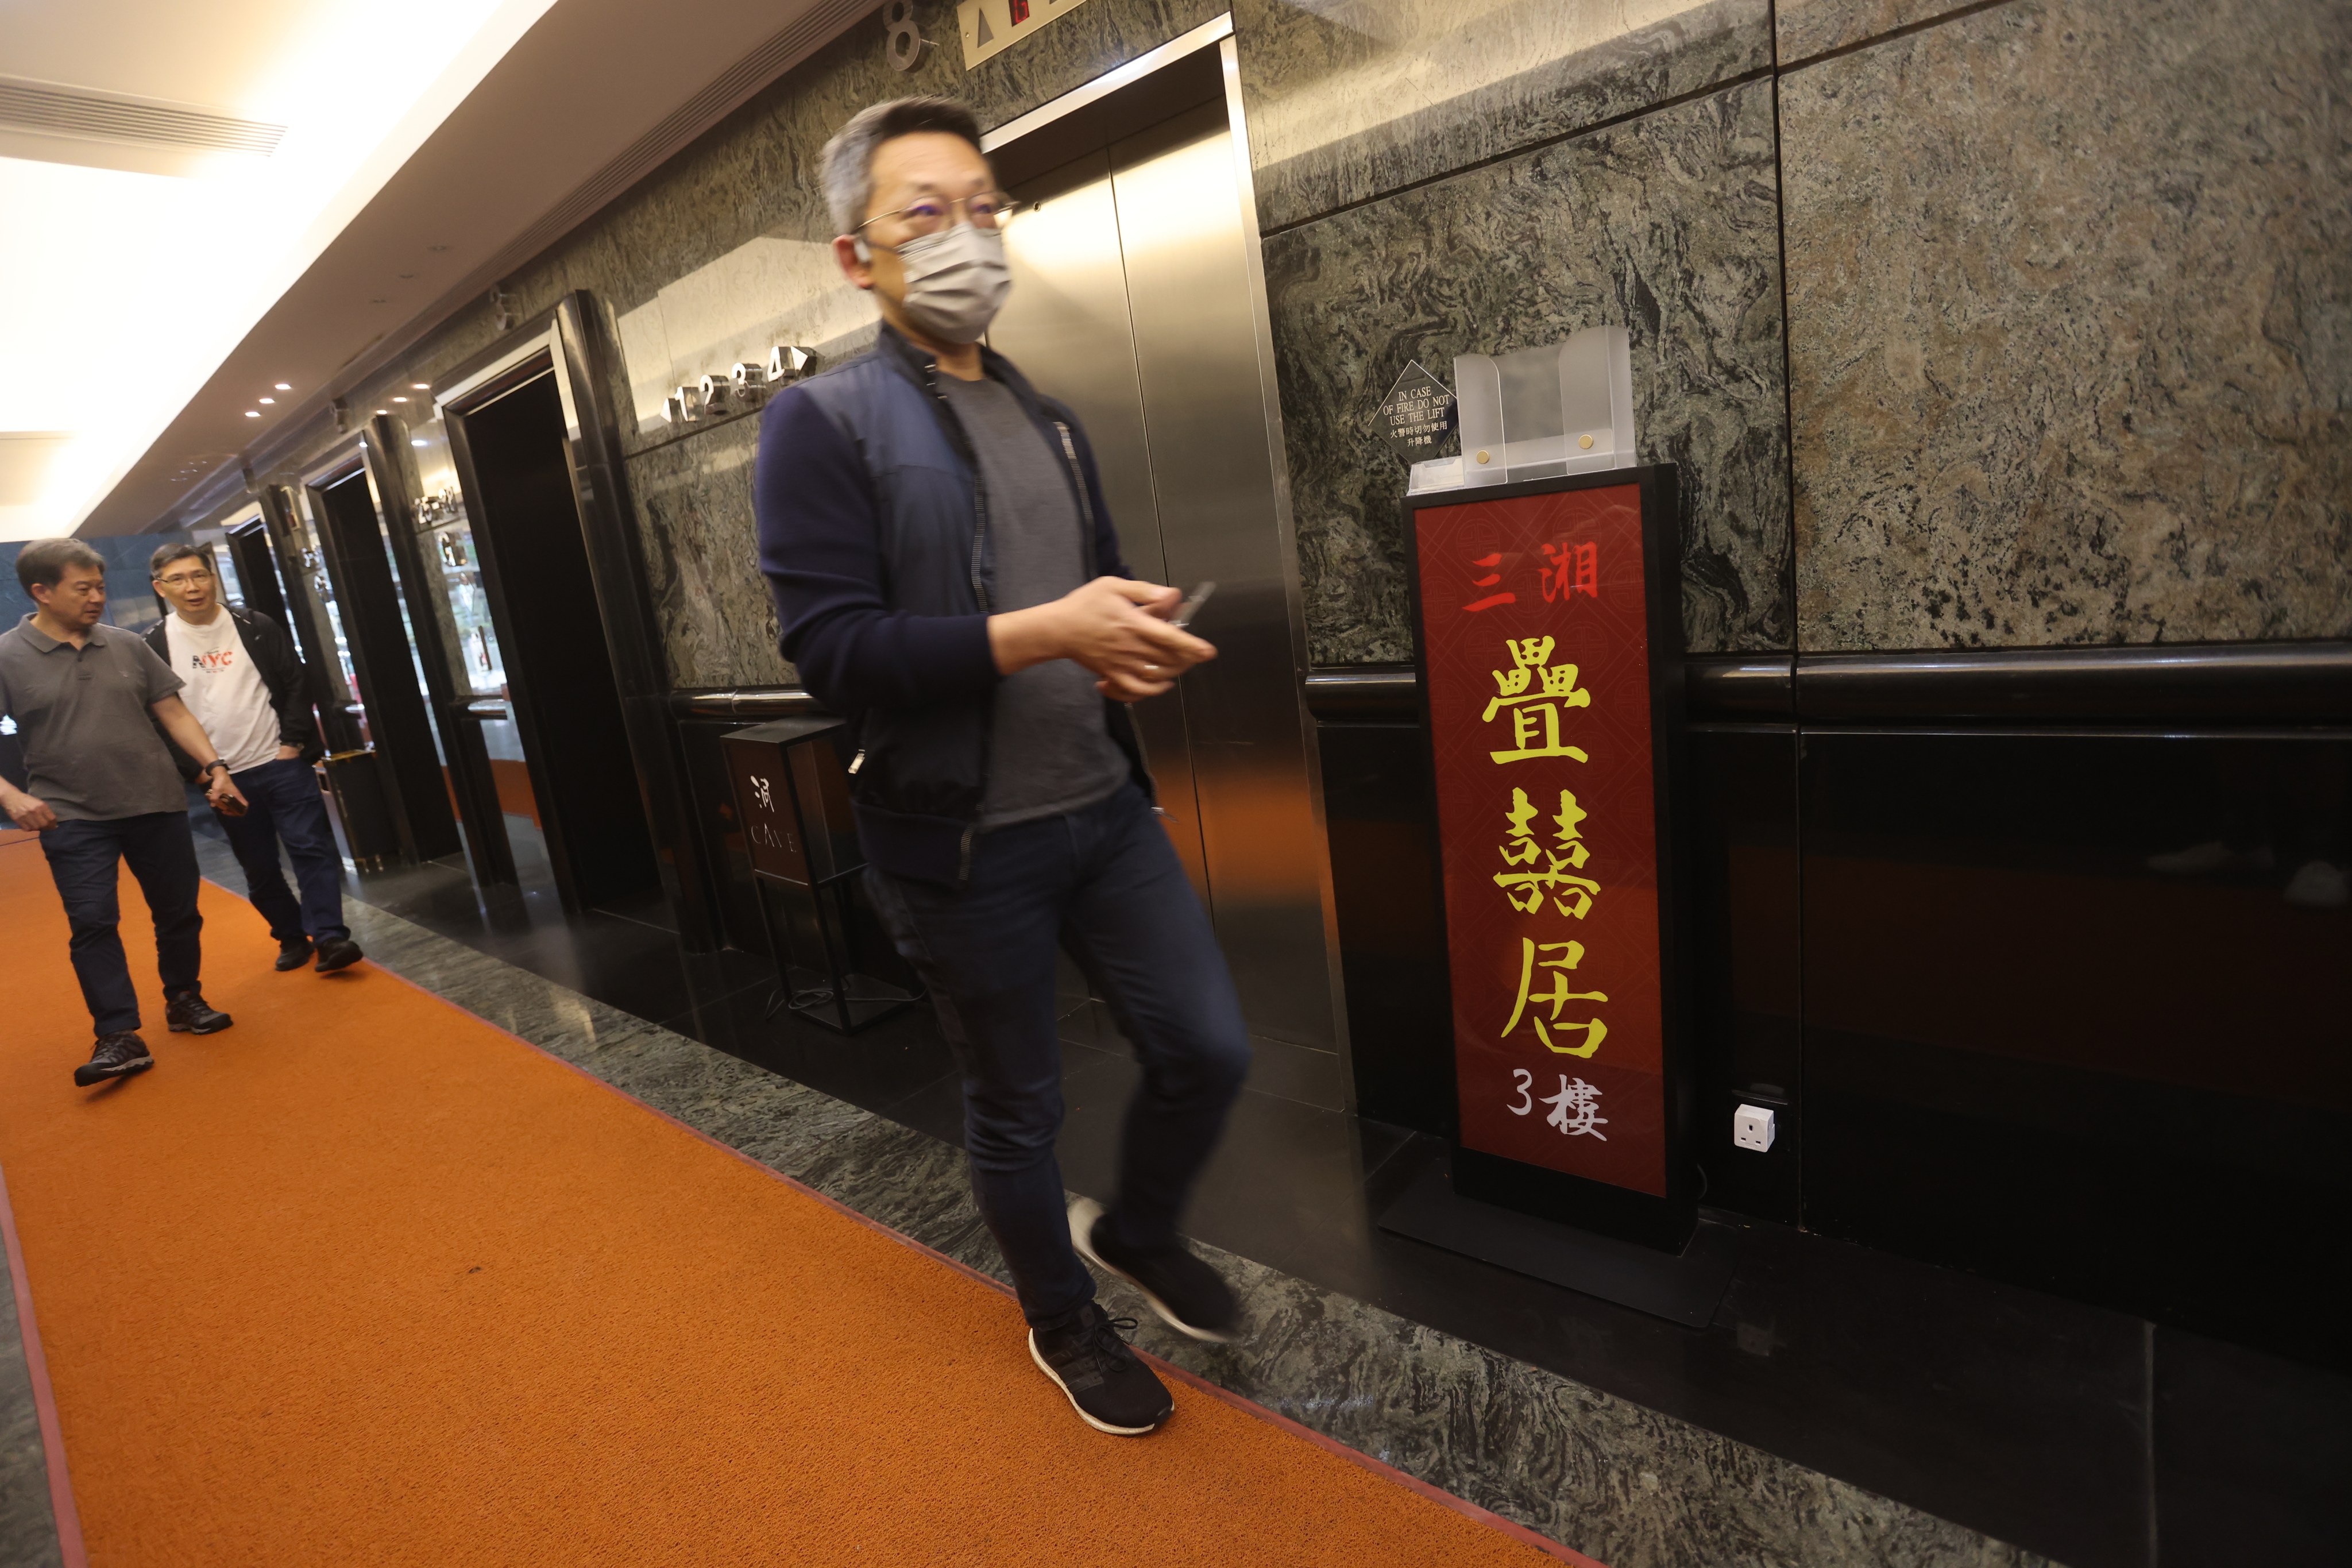 A sign next to lifts in Sunshine Plaza, Wan Chai, promoting D.H.K Seafood Restaurant, which has closed suddenly. Photo: Jonathan Wong